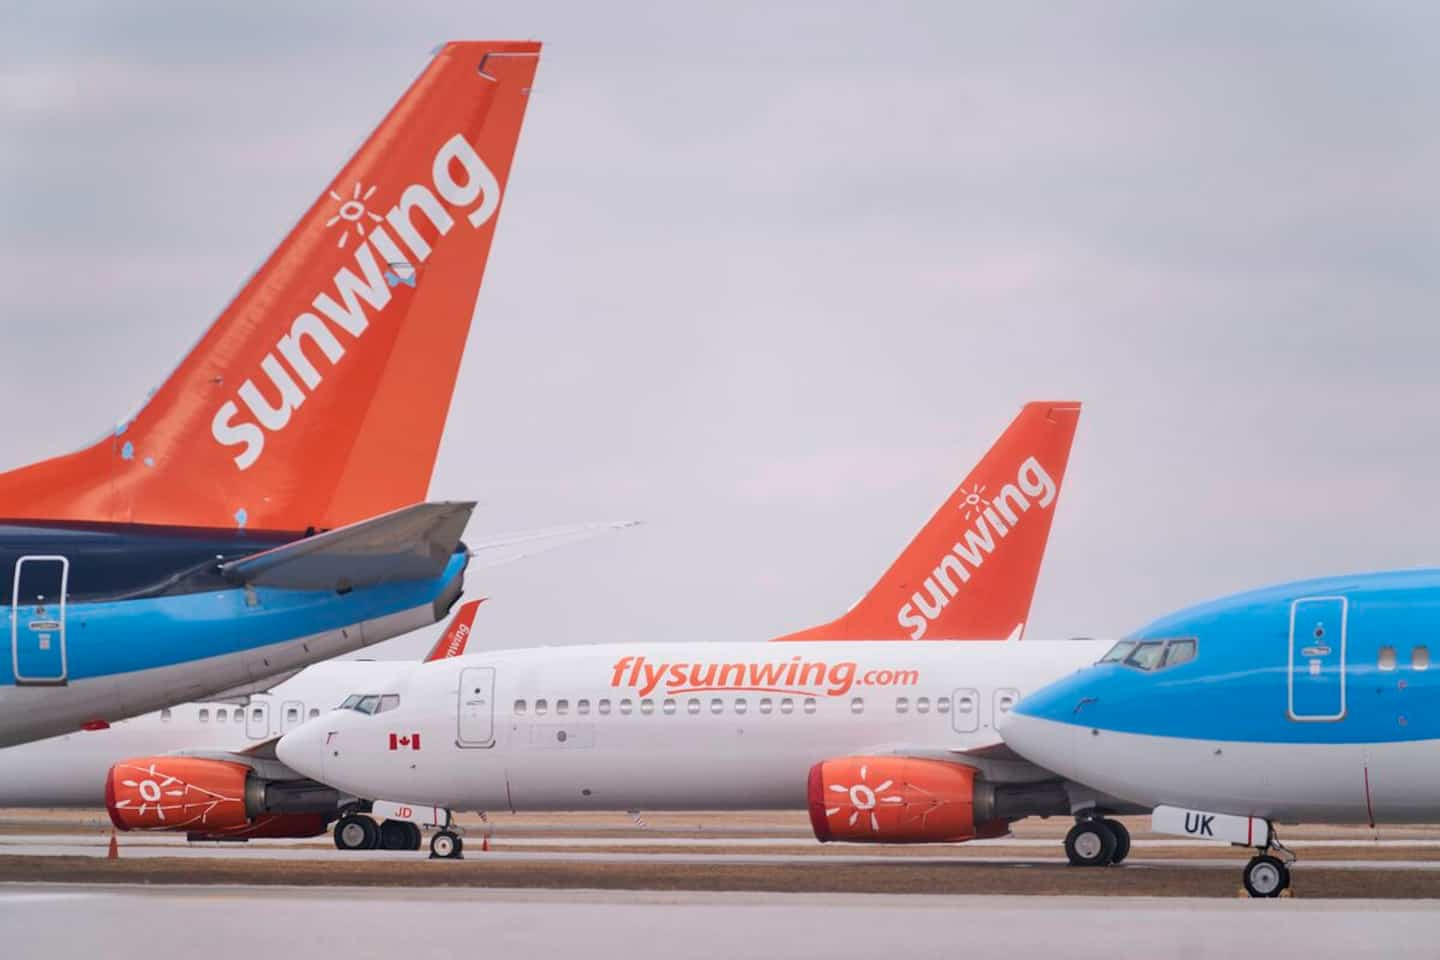 Sunwing plans to repatriate all customers stranded in the South by Monday